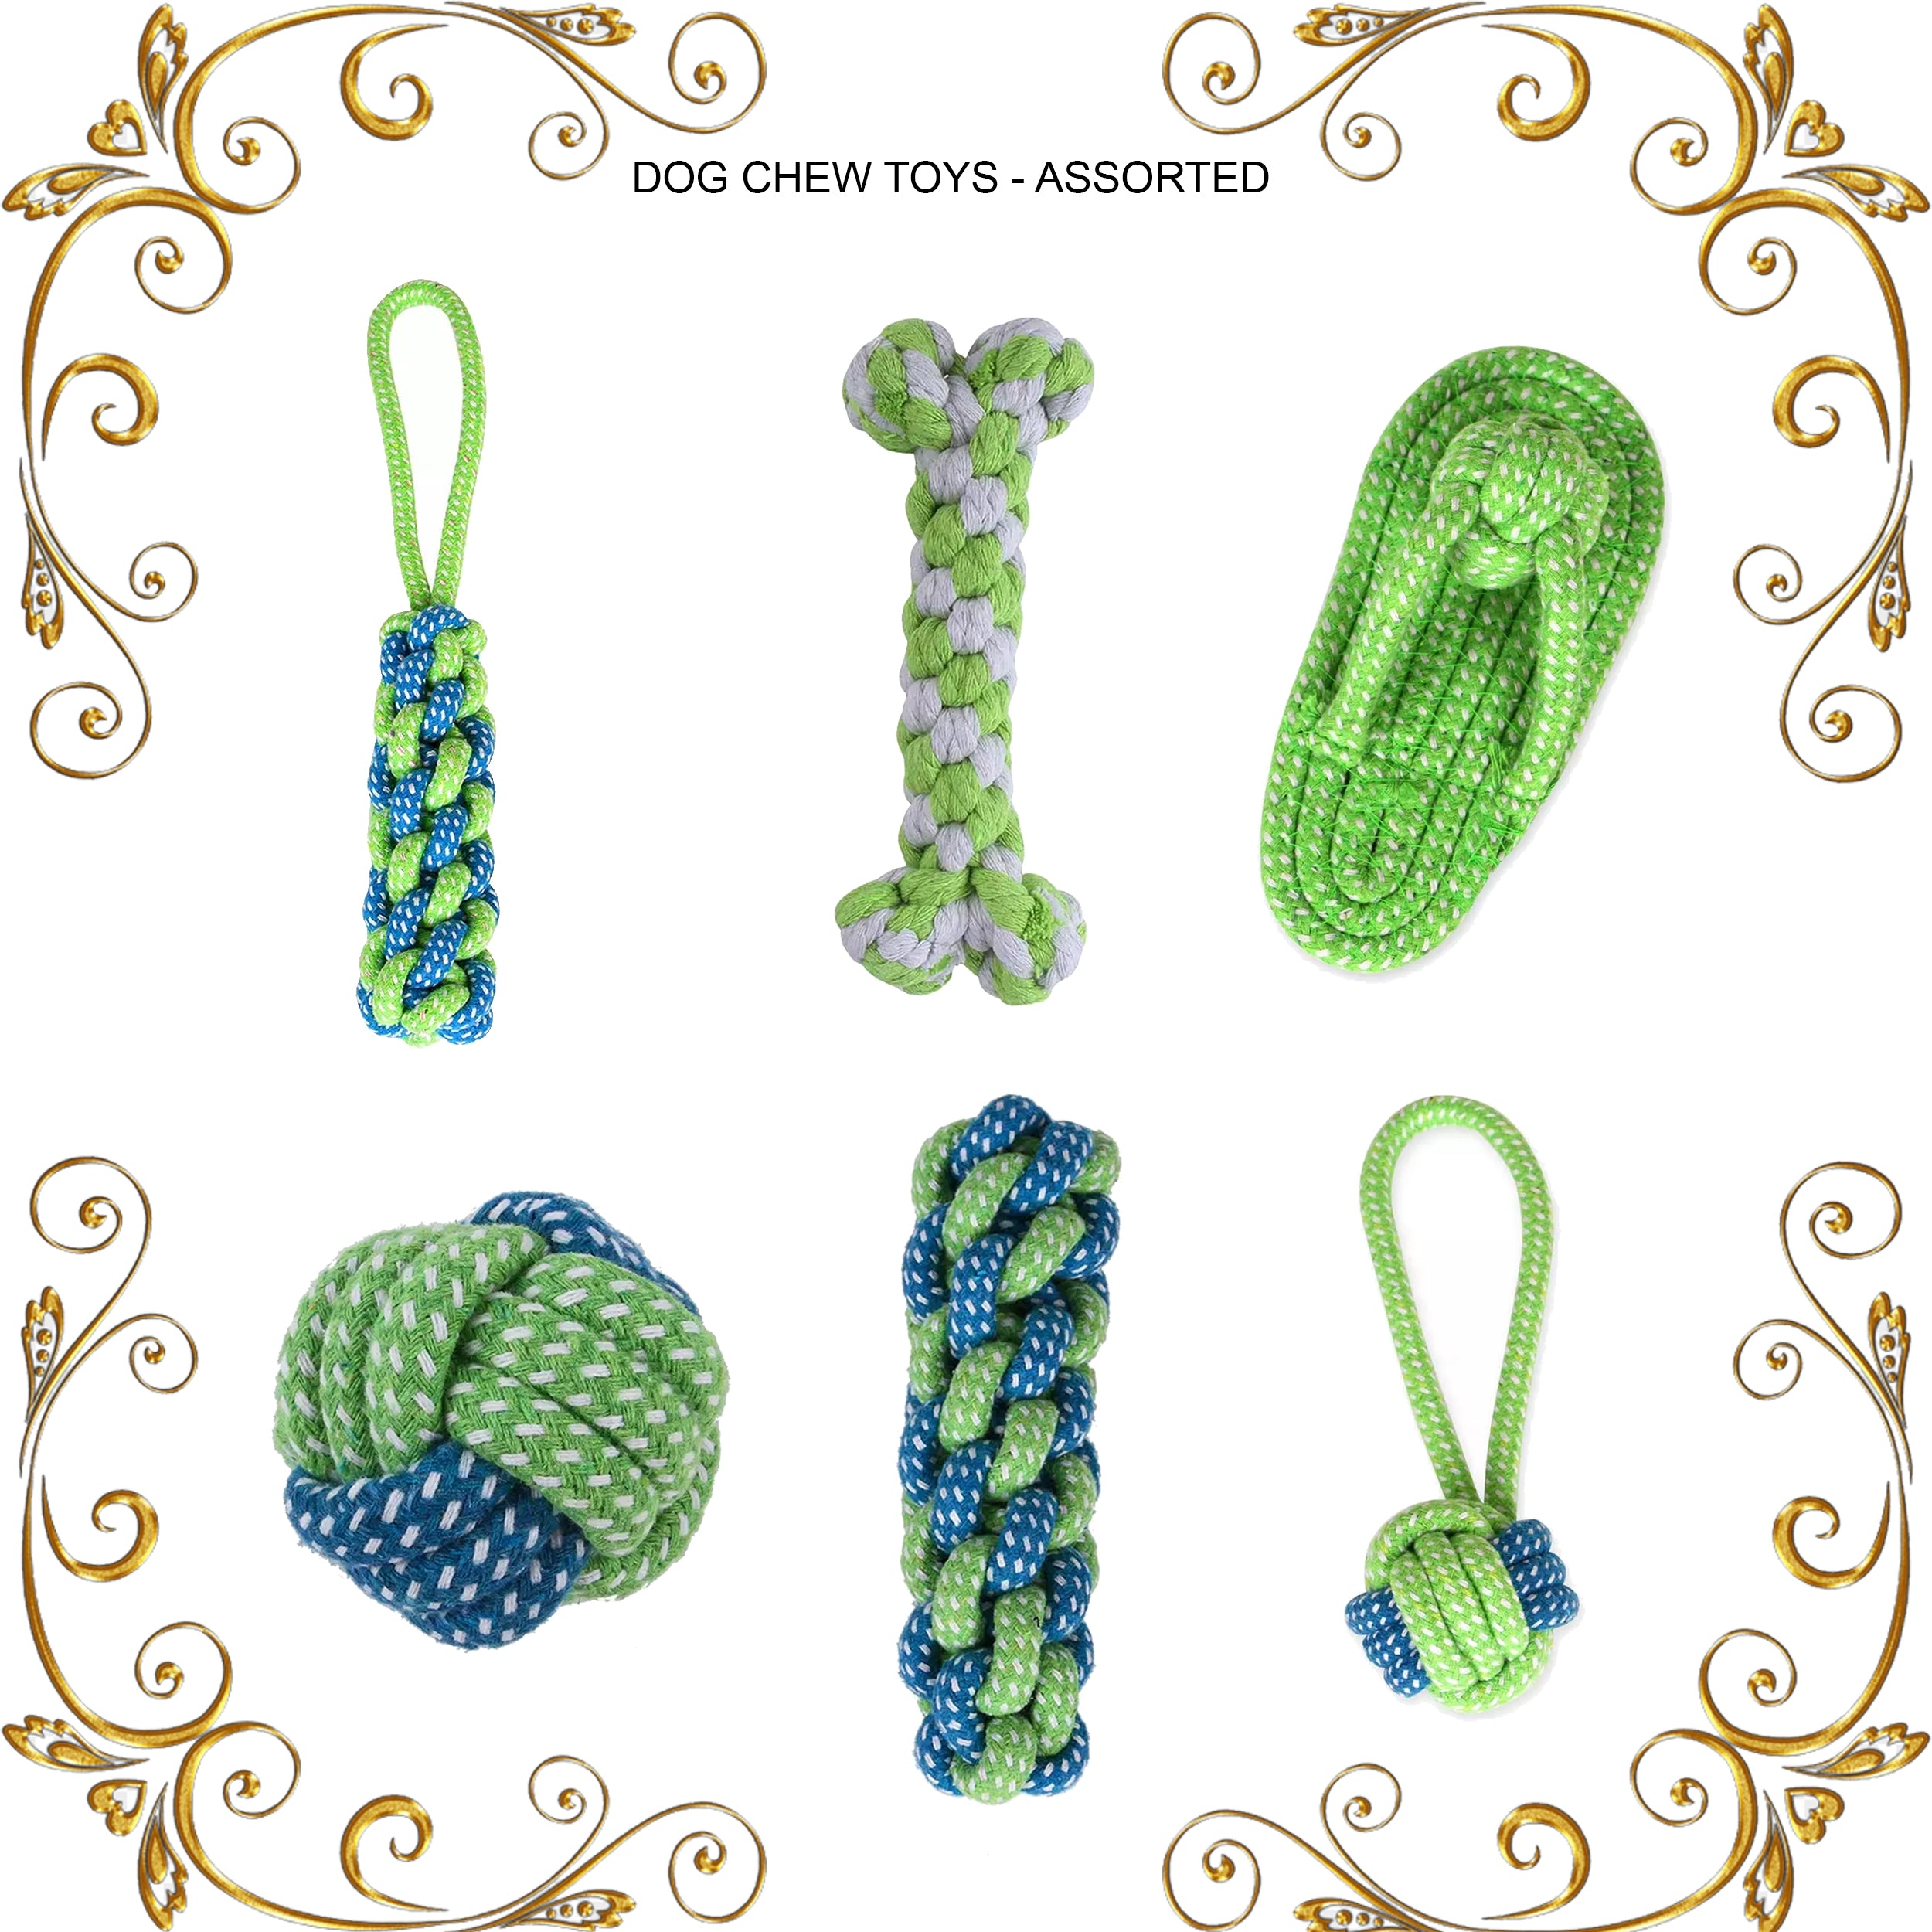 Bone Shape Rope Dog Chewing Toy - Perfect for Small to Medium Dogs